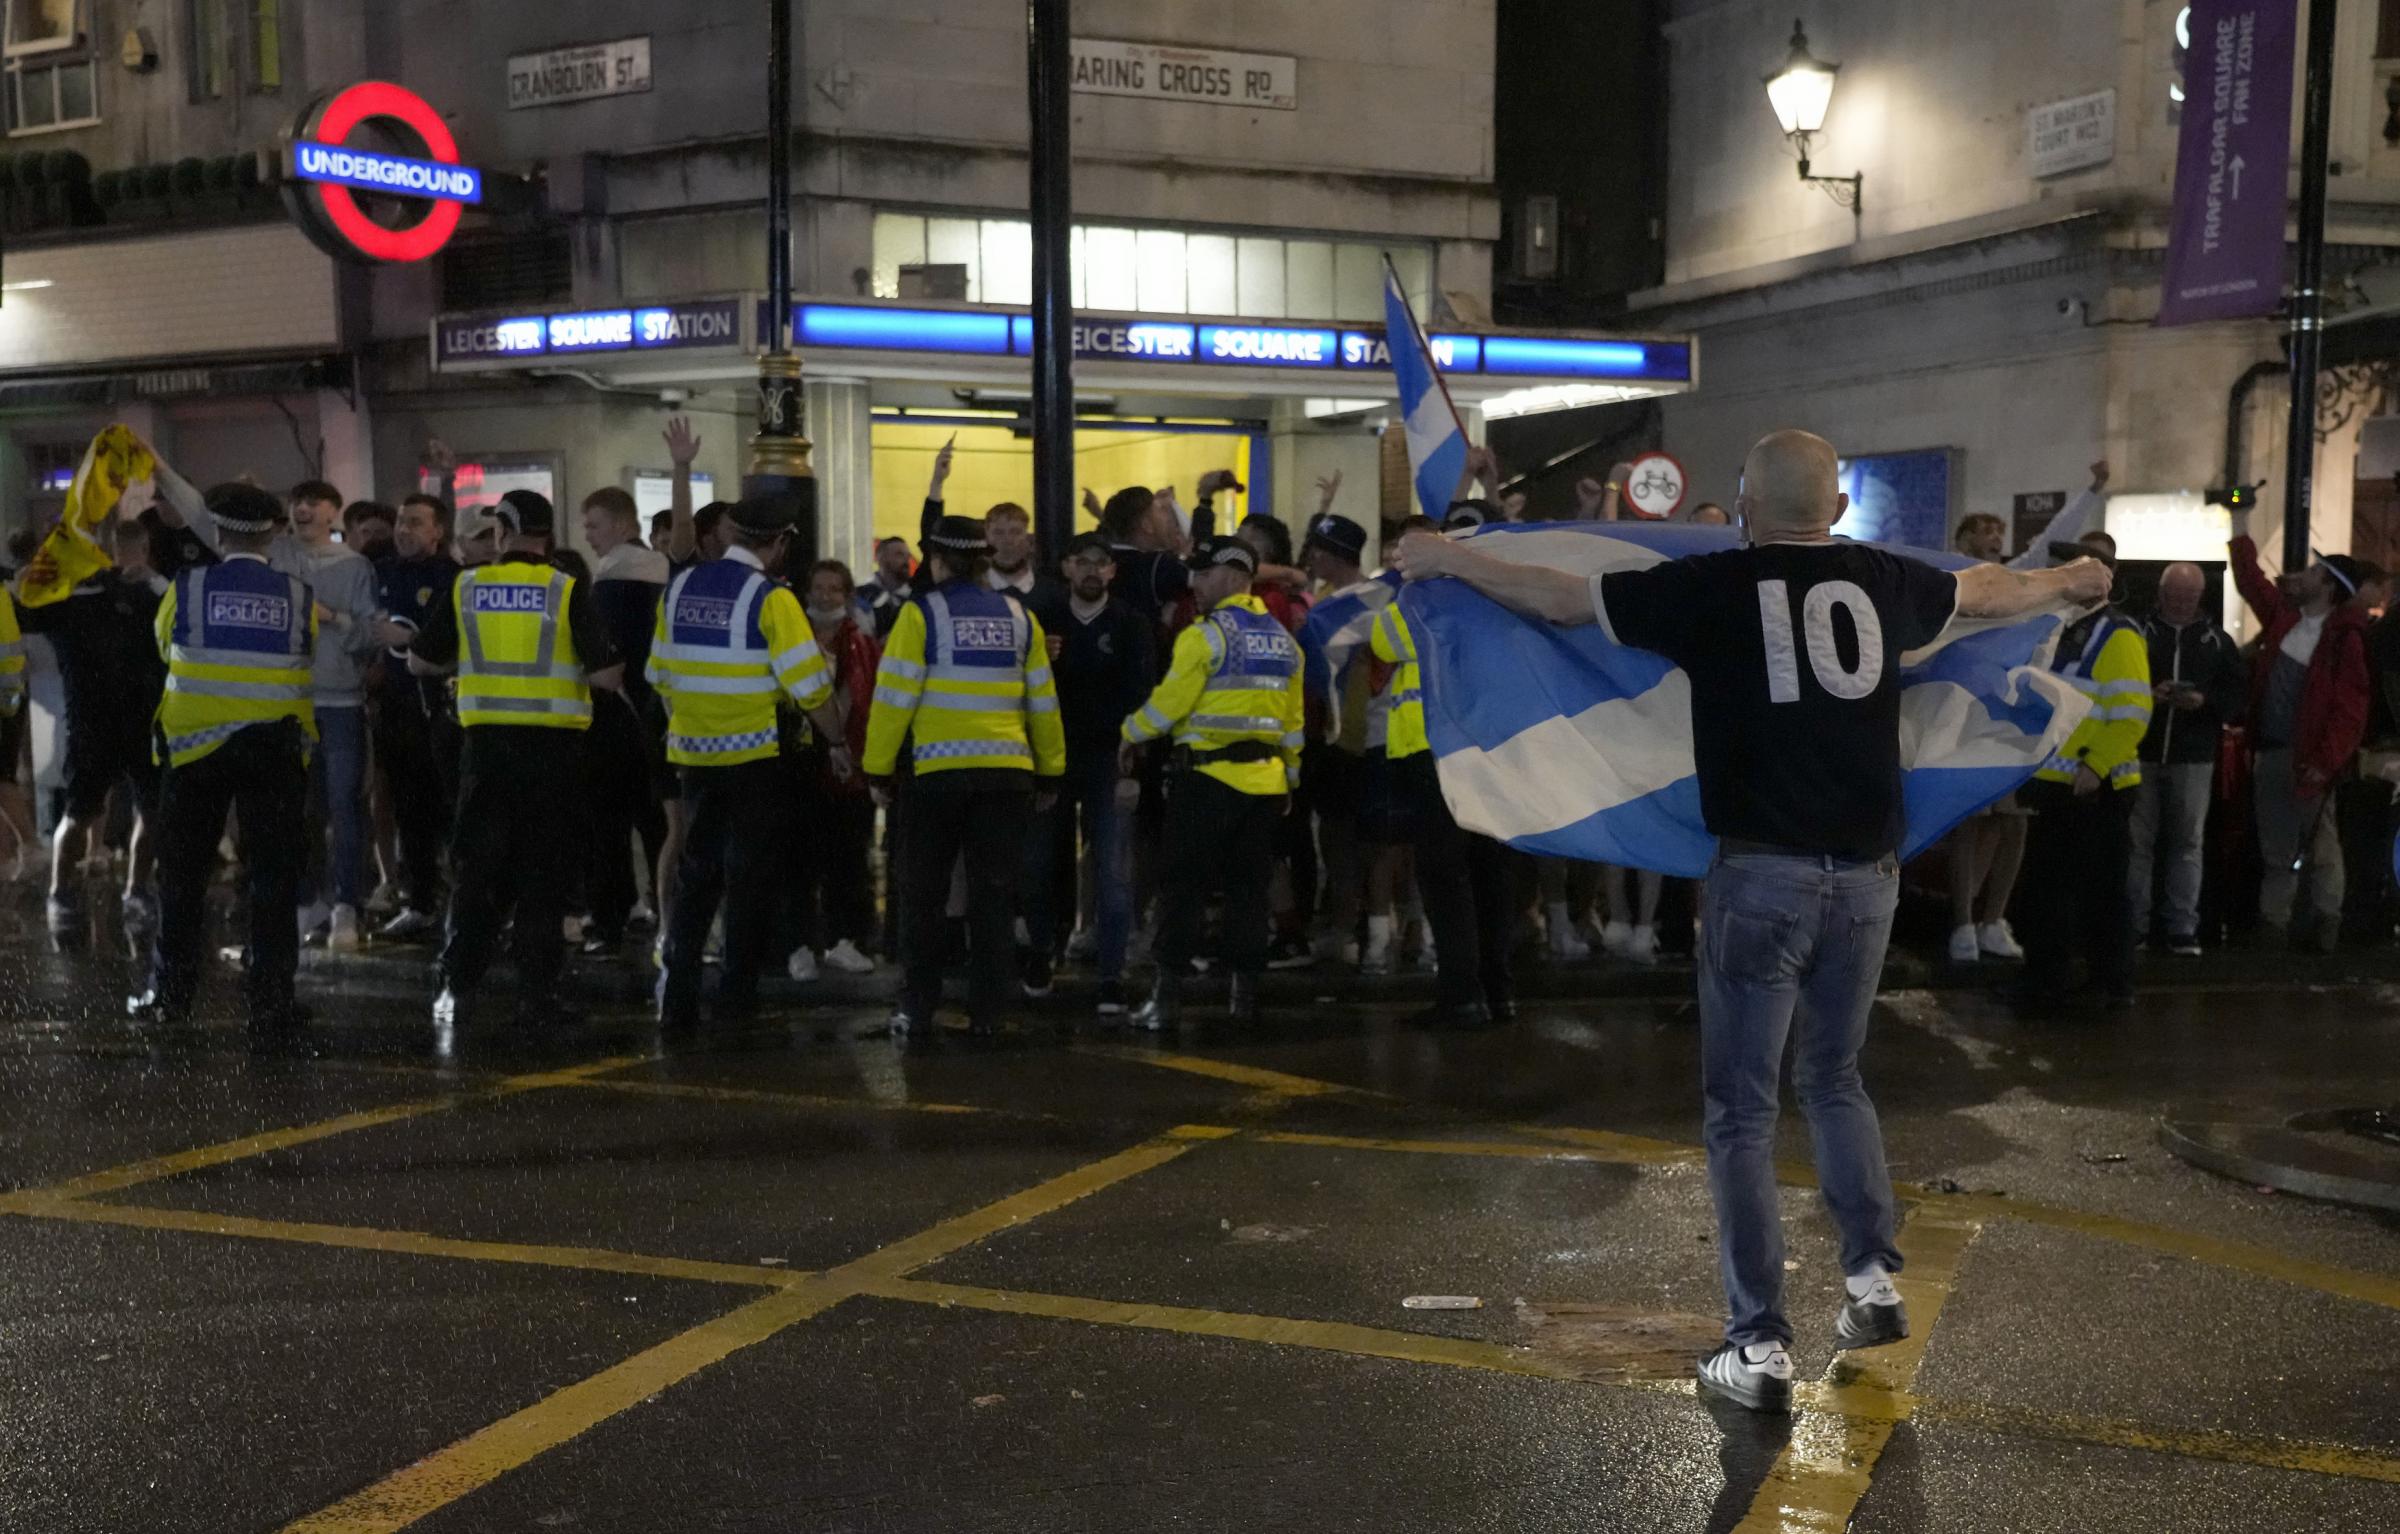 A Scotland supporter reacts outside Leicester Square tube station in London, Friday, June 18, 2021 after the Euro 2020 soccer championship group D match between England and Scotland at Wembley Stadium. The match ended in a 0-0 draw. (AP Photo/Kirsty